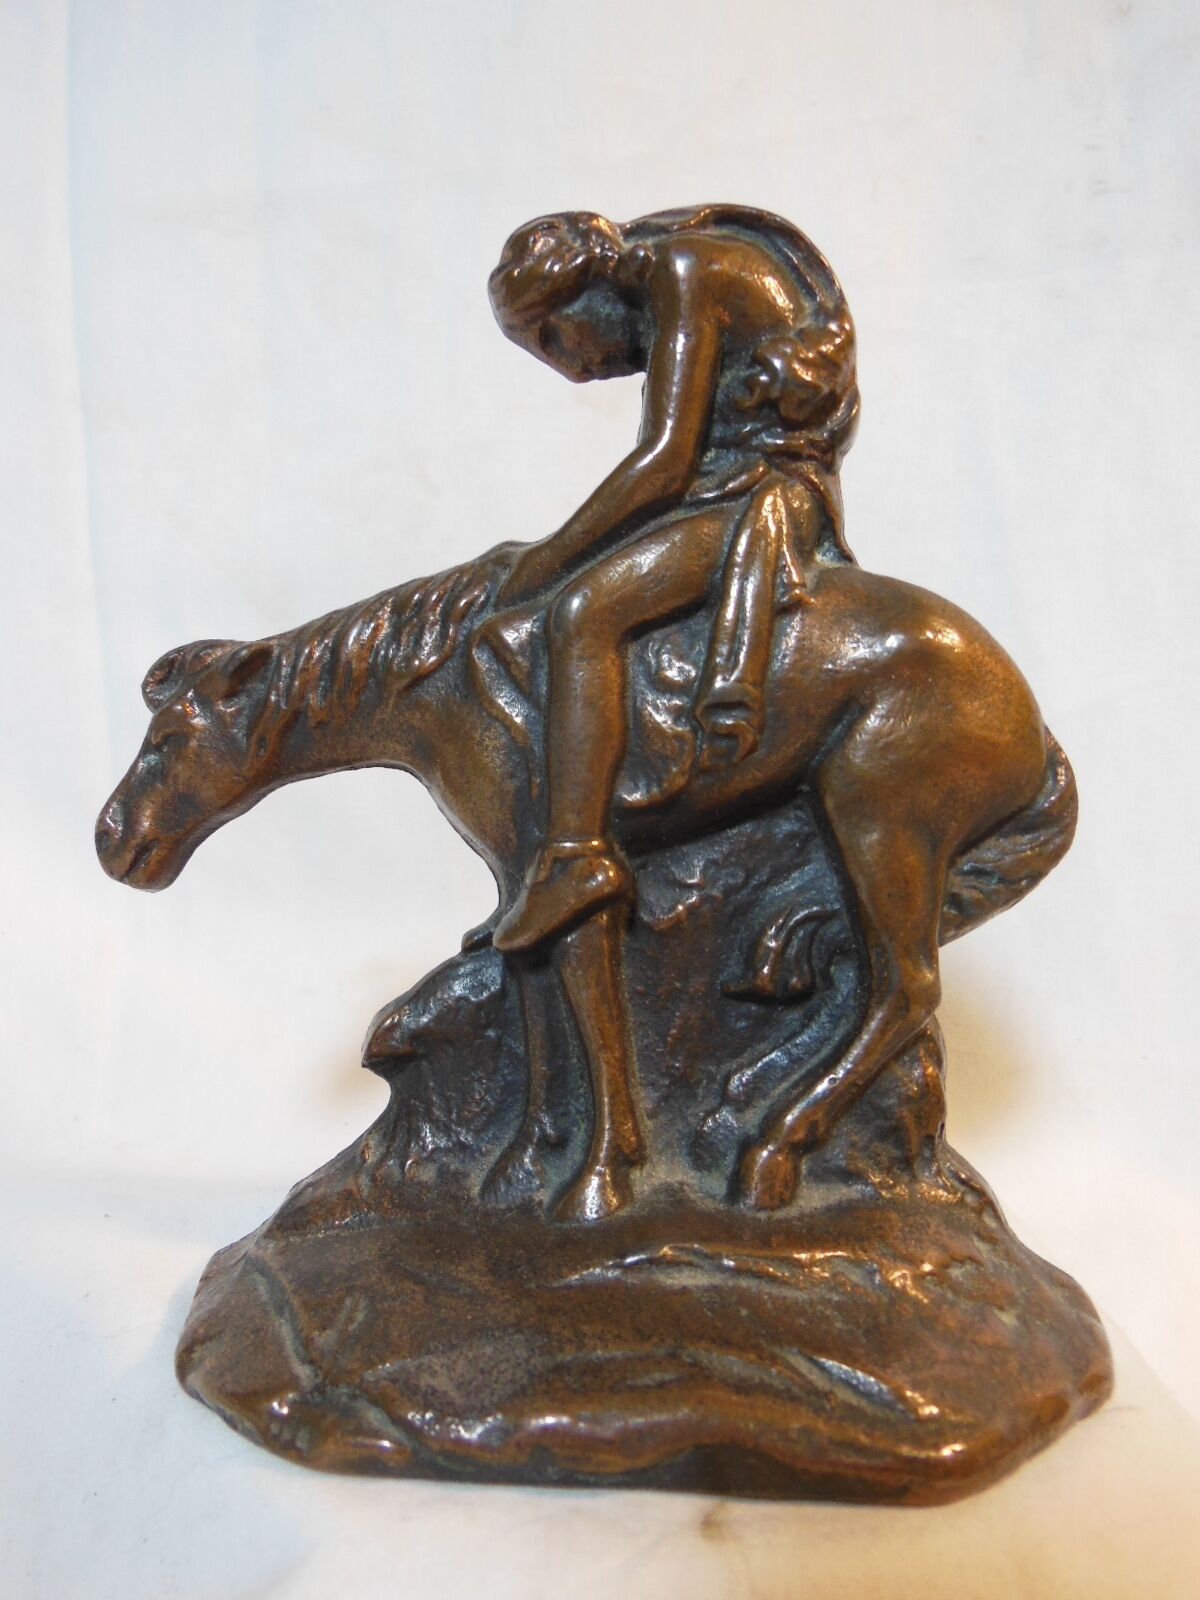 Vintage END OF TRAIL INDIAN ON HORSE Single BOOK END / SCULPTURE by W.H. Howell